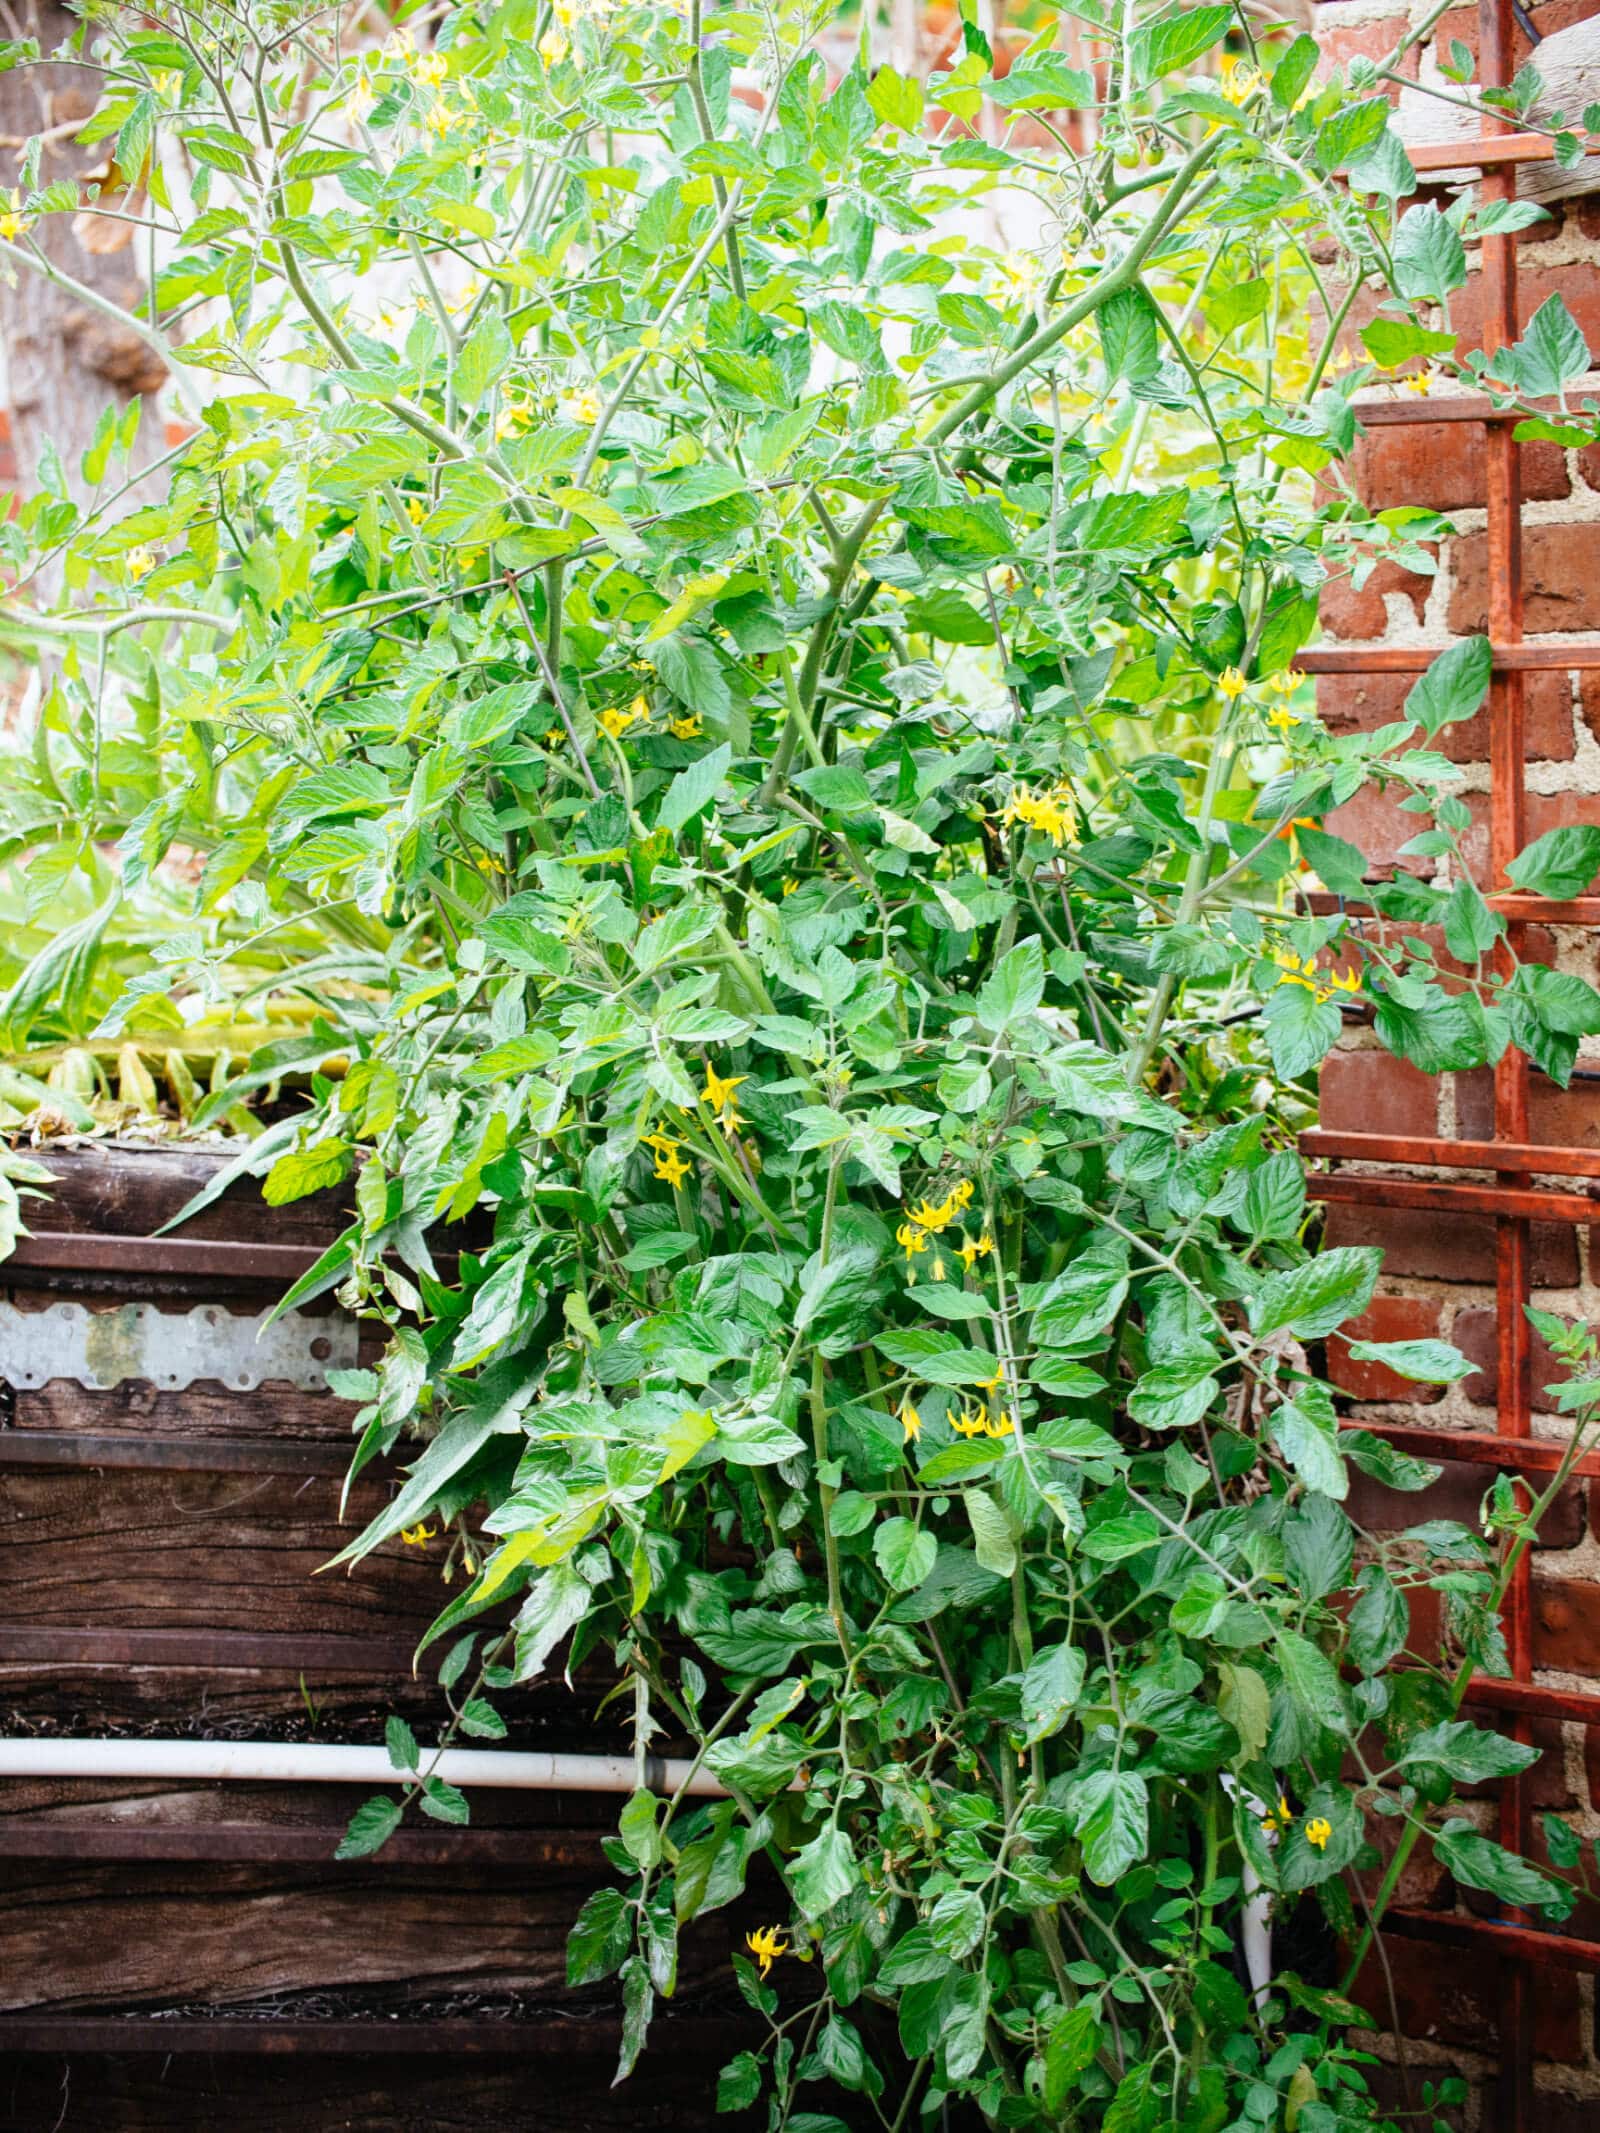 Choose a location with full sun for your tomato plants